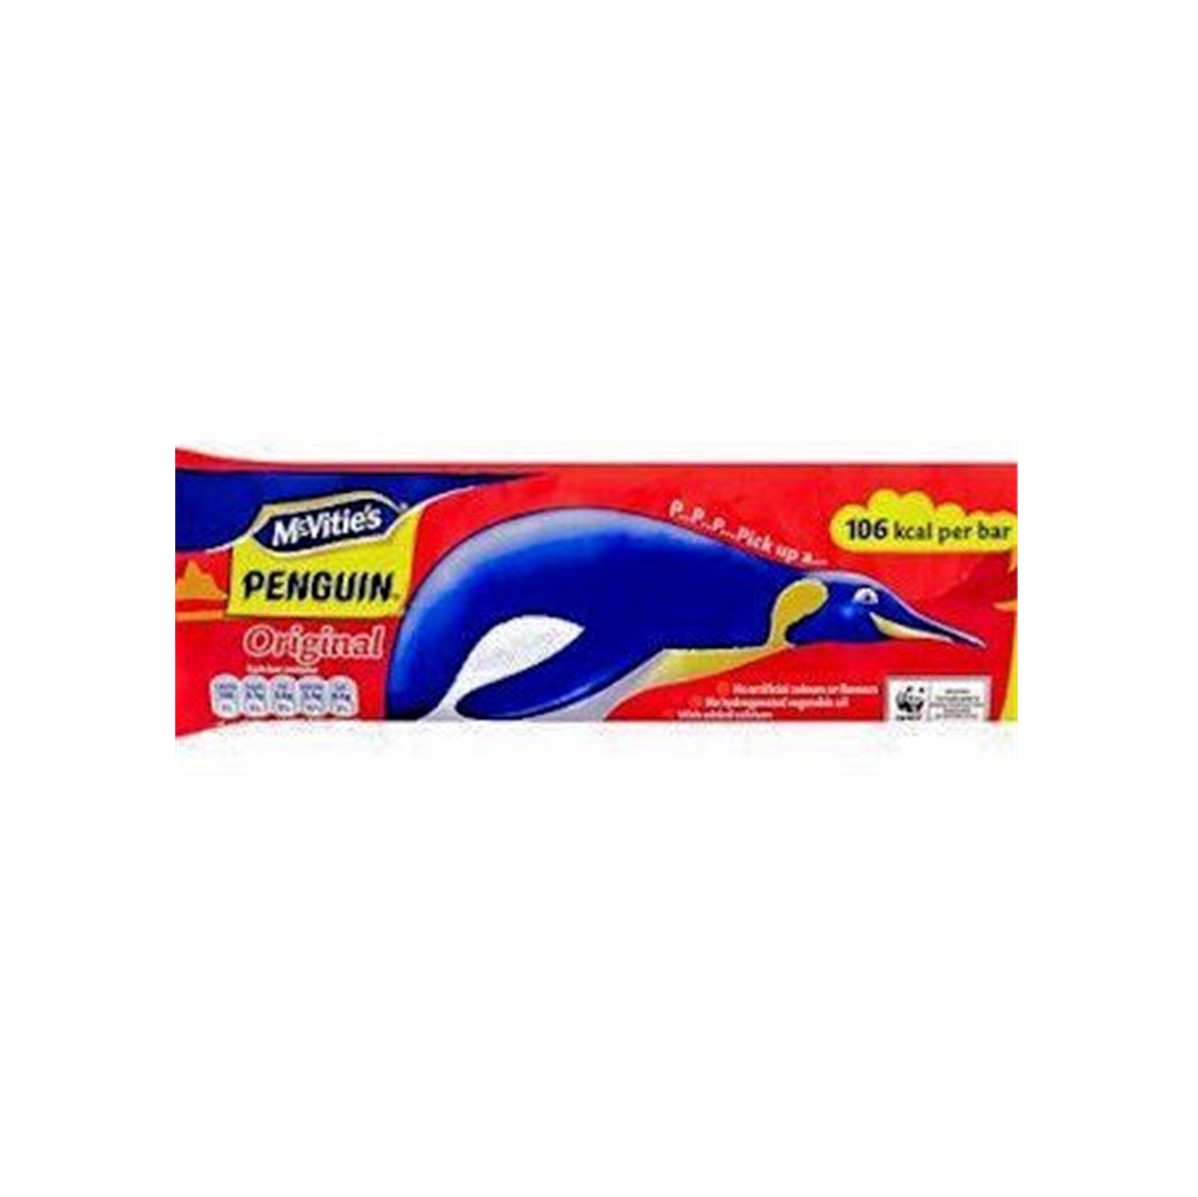 Mcvitie's Penguins - 72 wrapped biscuits